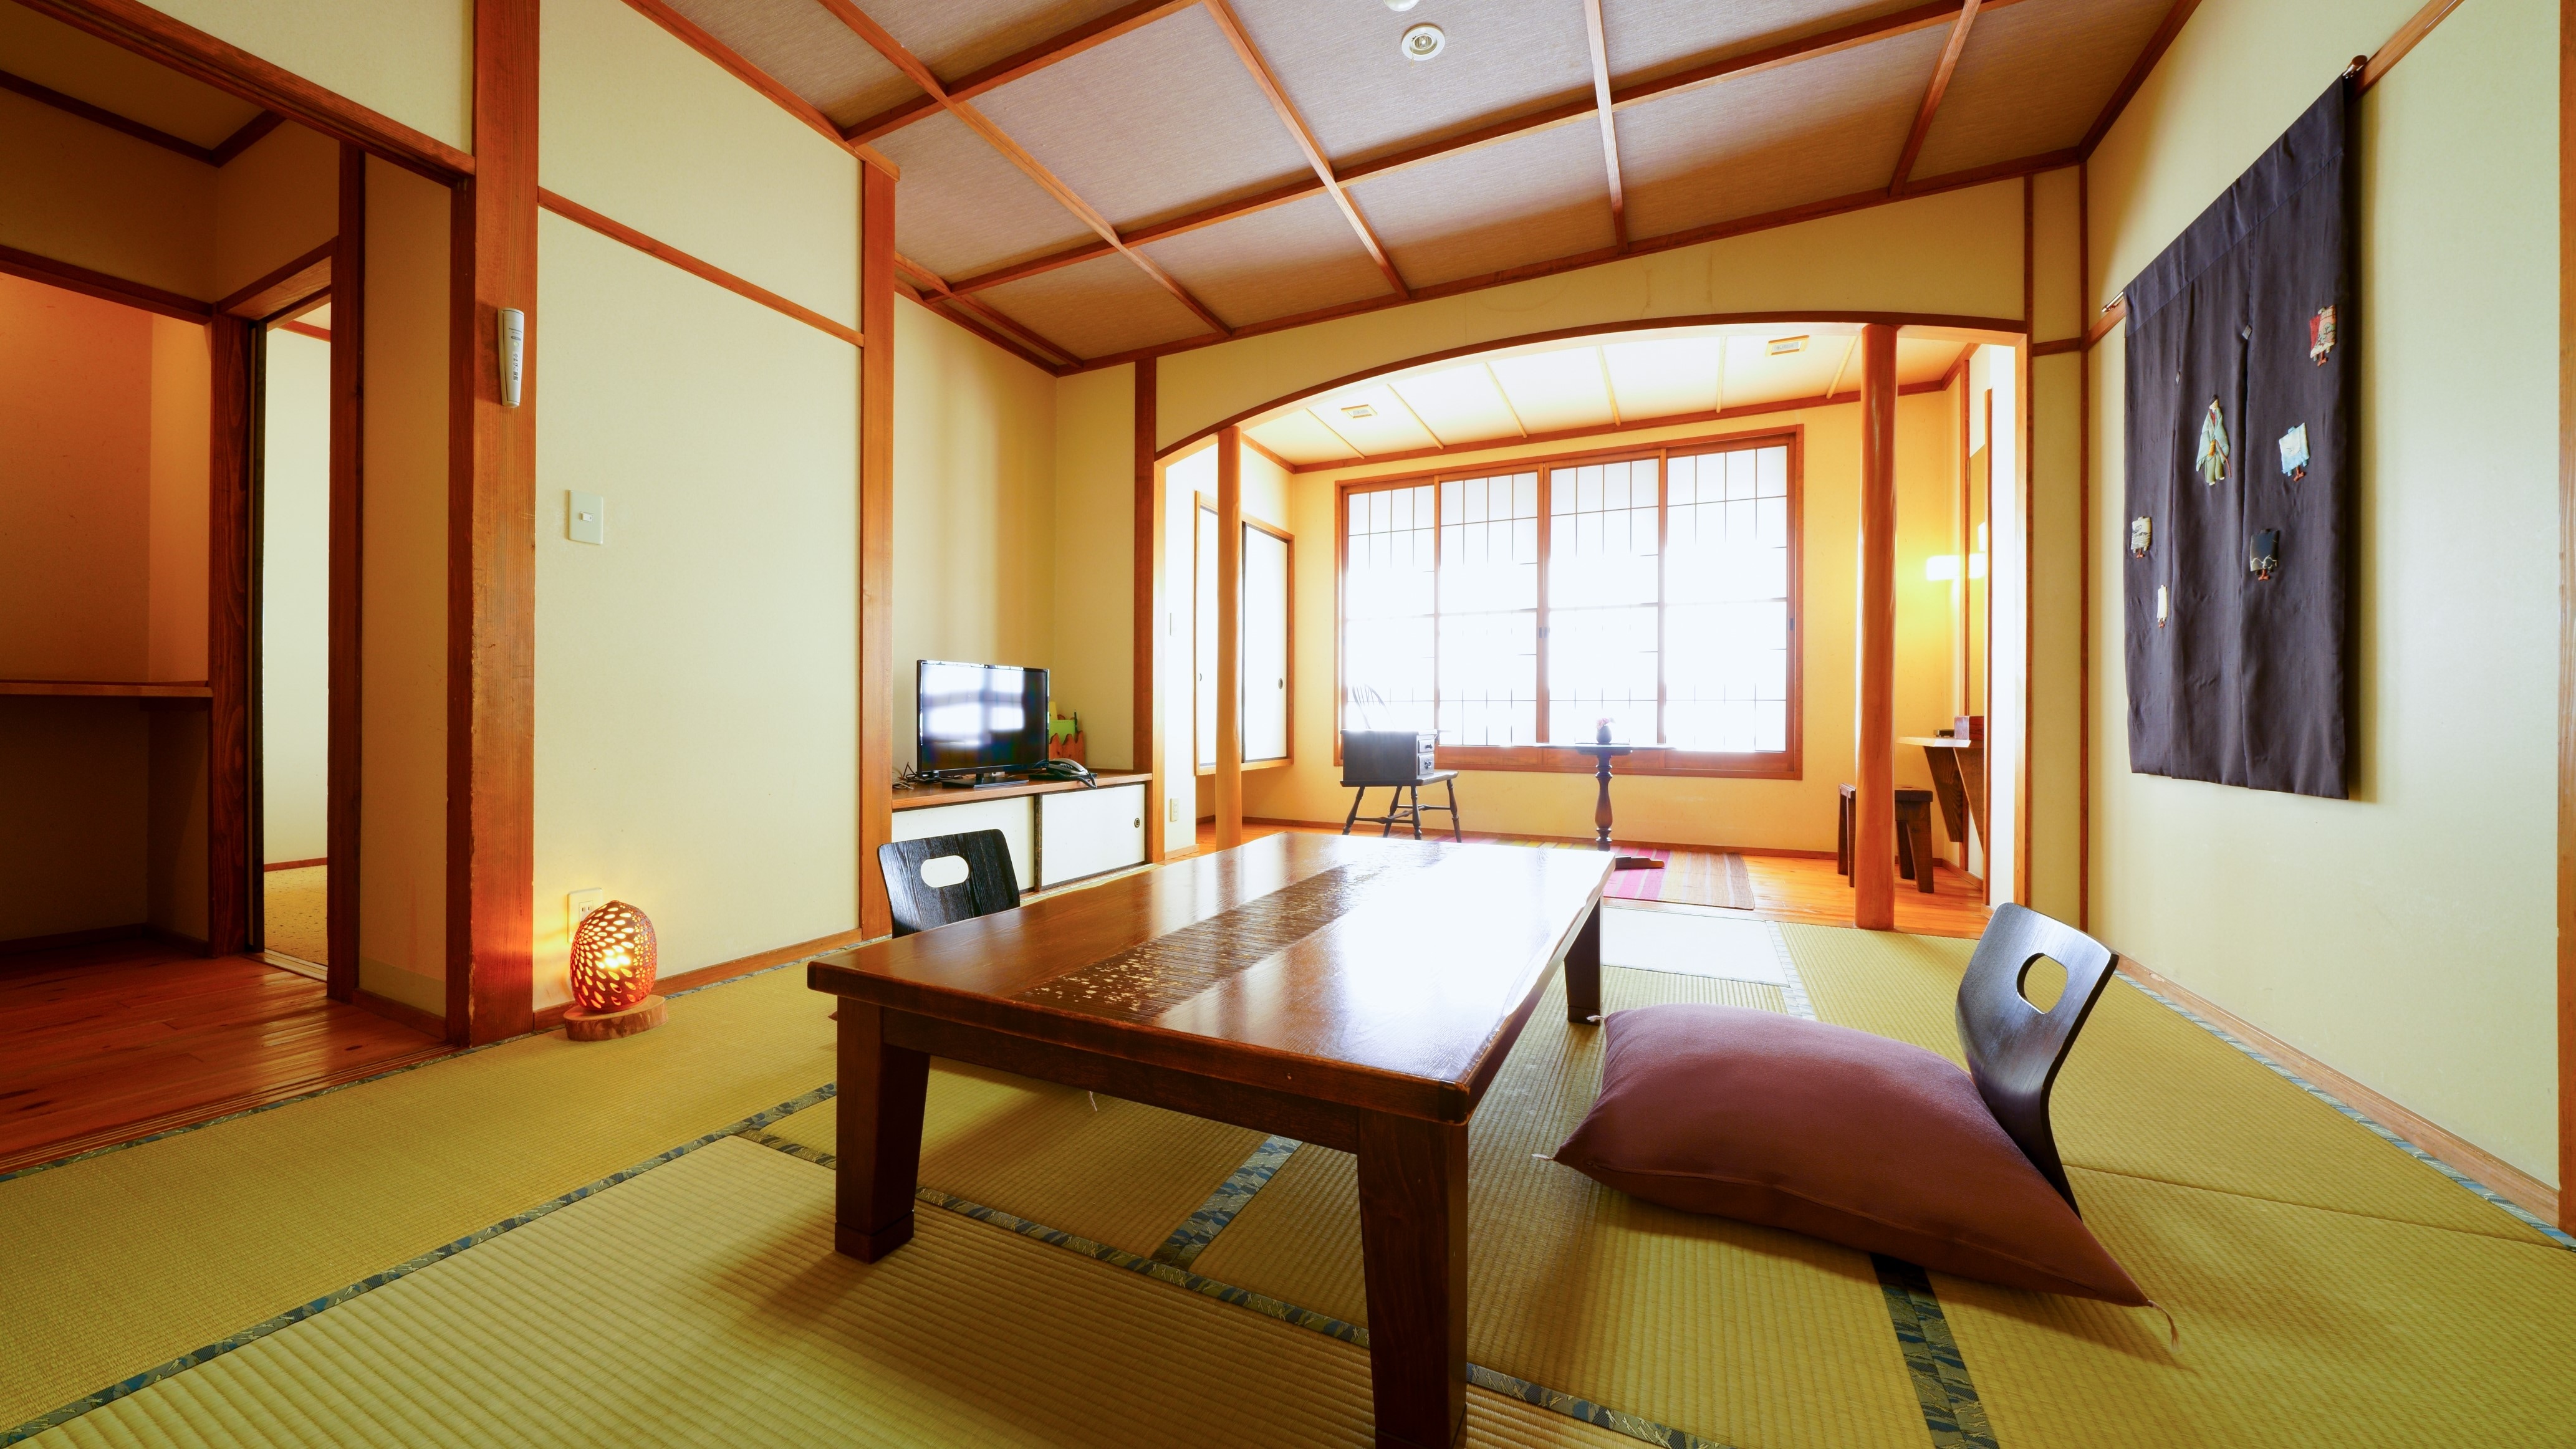 Western-style room and Japanese-style room are separated ・ Main building 2nd floor "Japanese-Western style room"